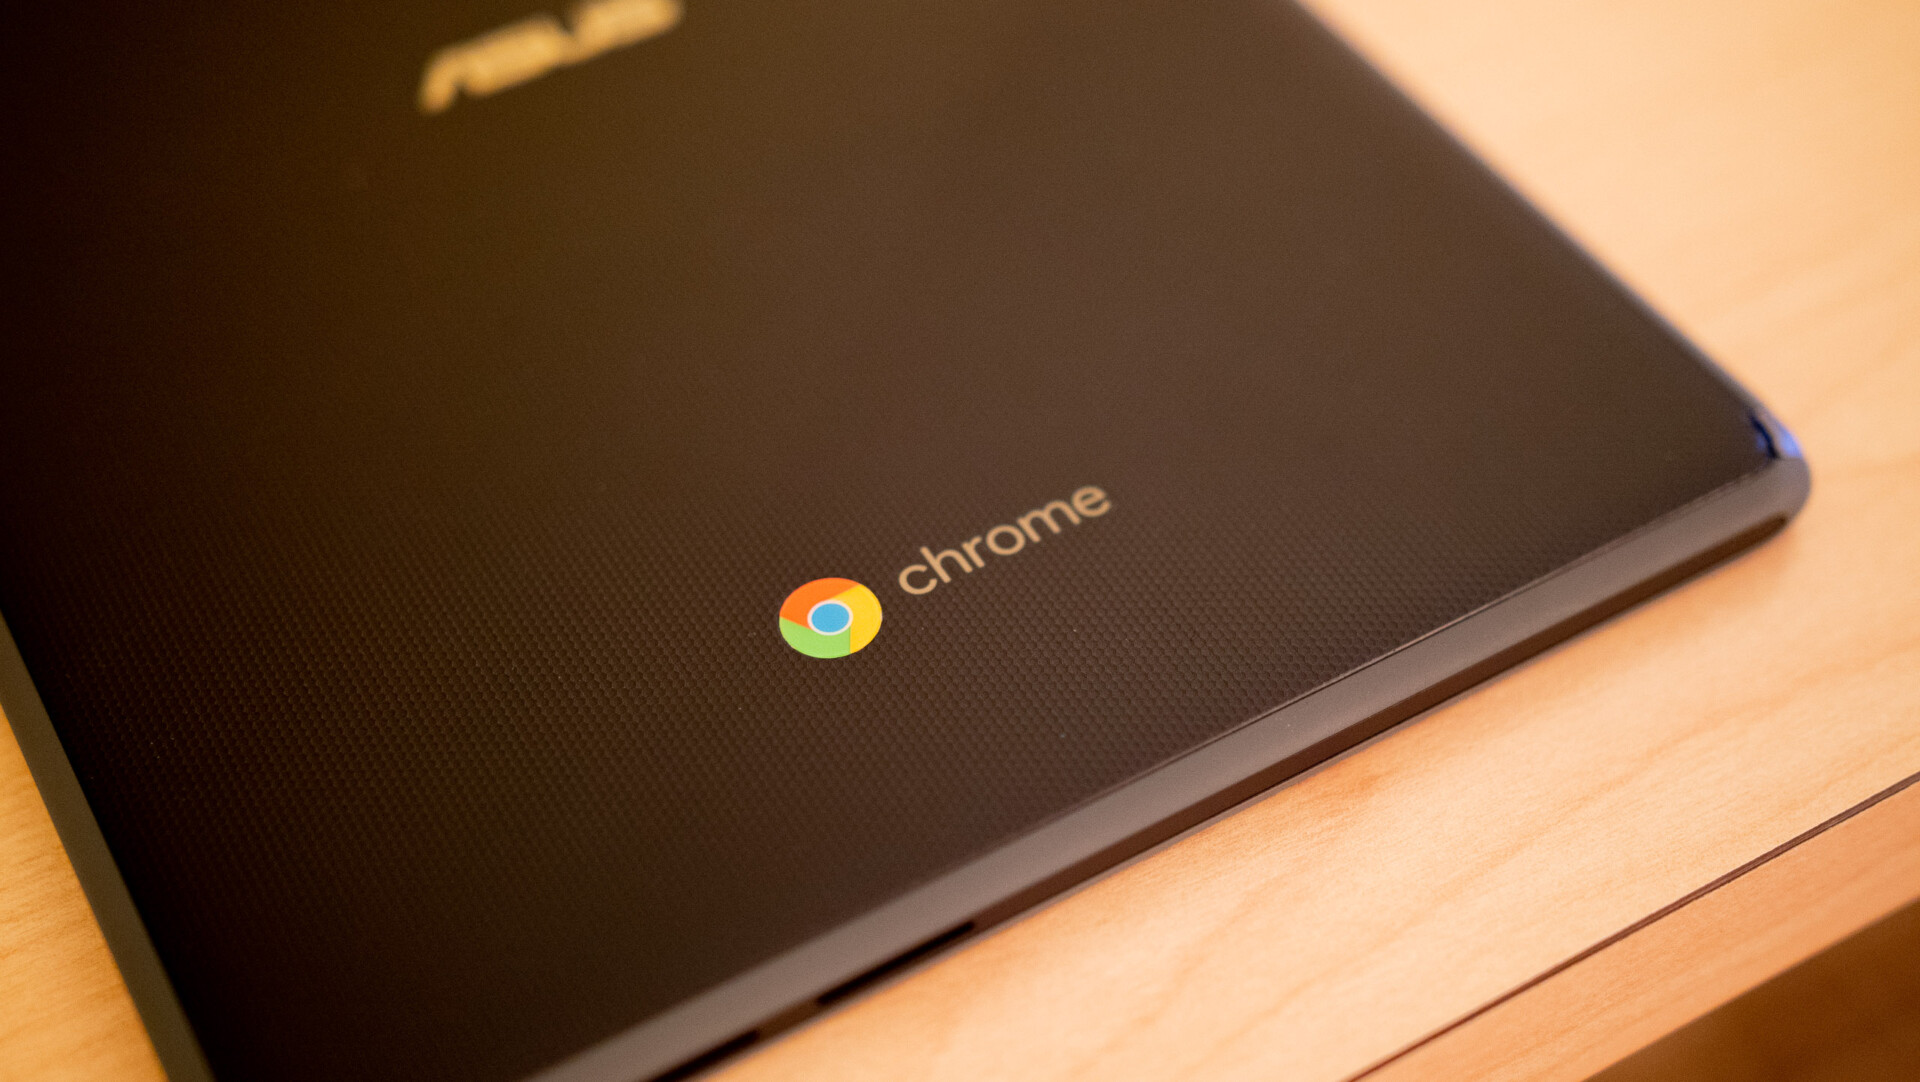 You can now get Google Assistant on Chromebooks made by other brands.